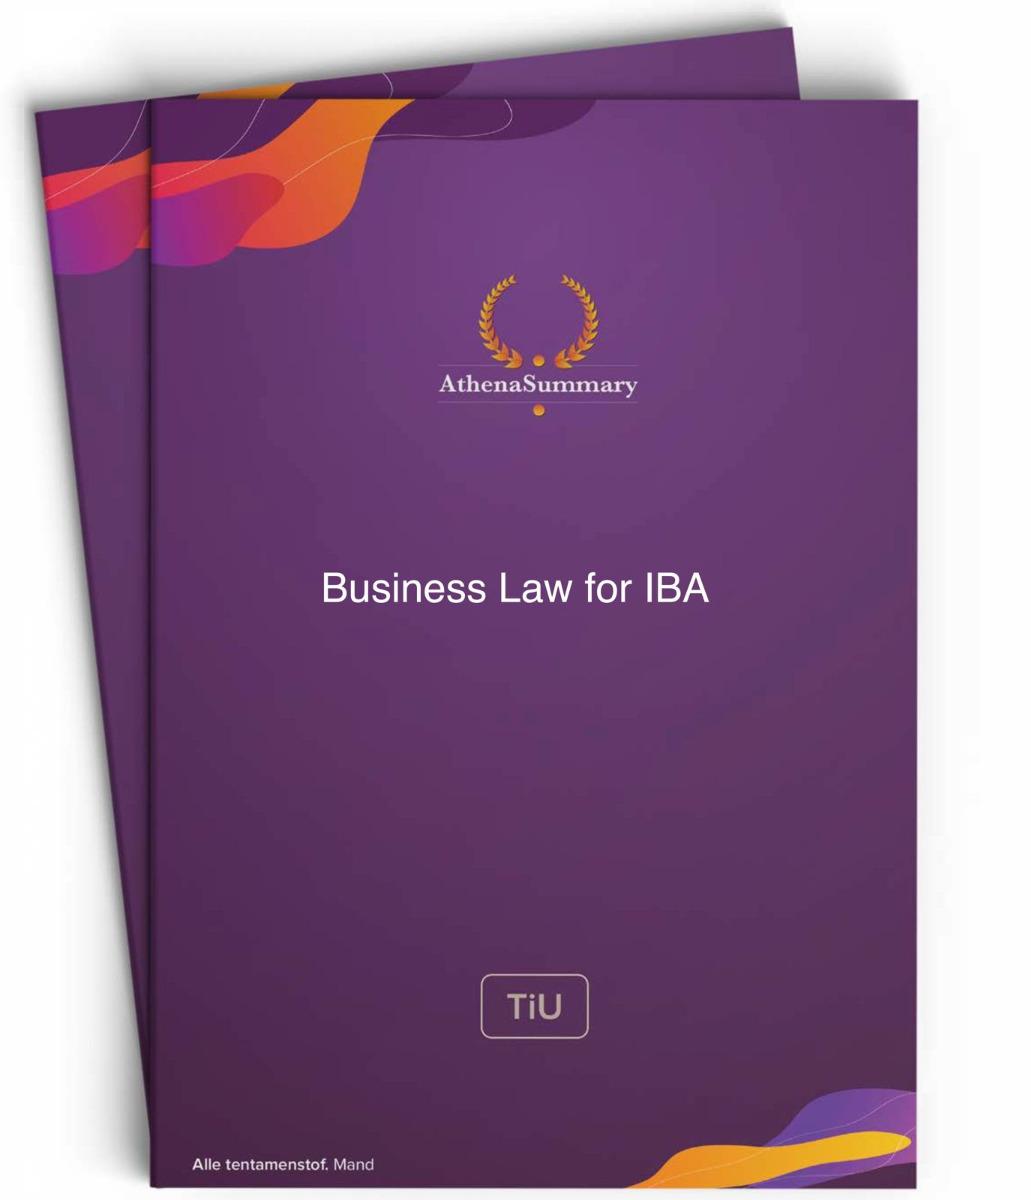 Literature and Lecture Summary: Business Law for IBA